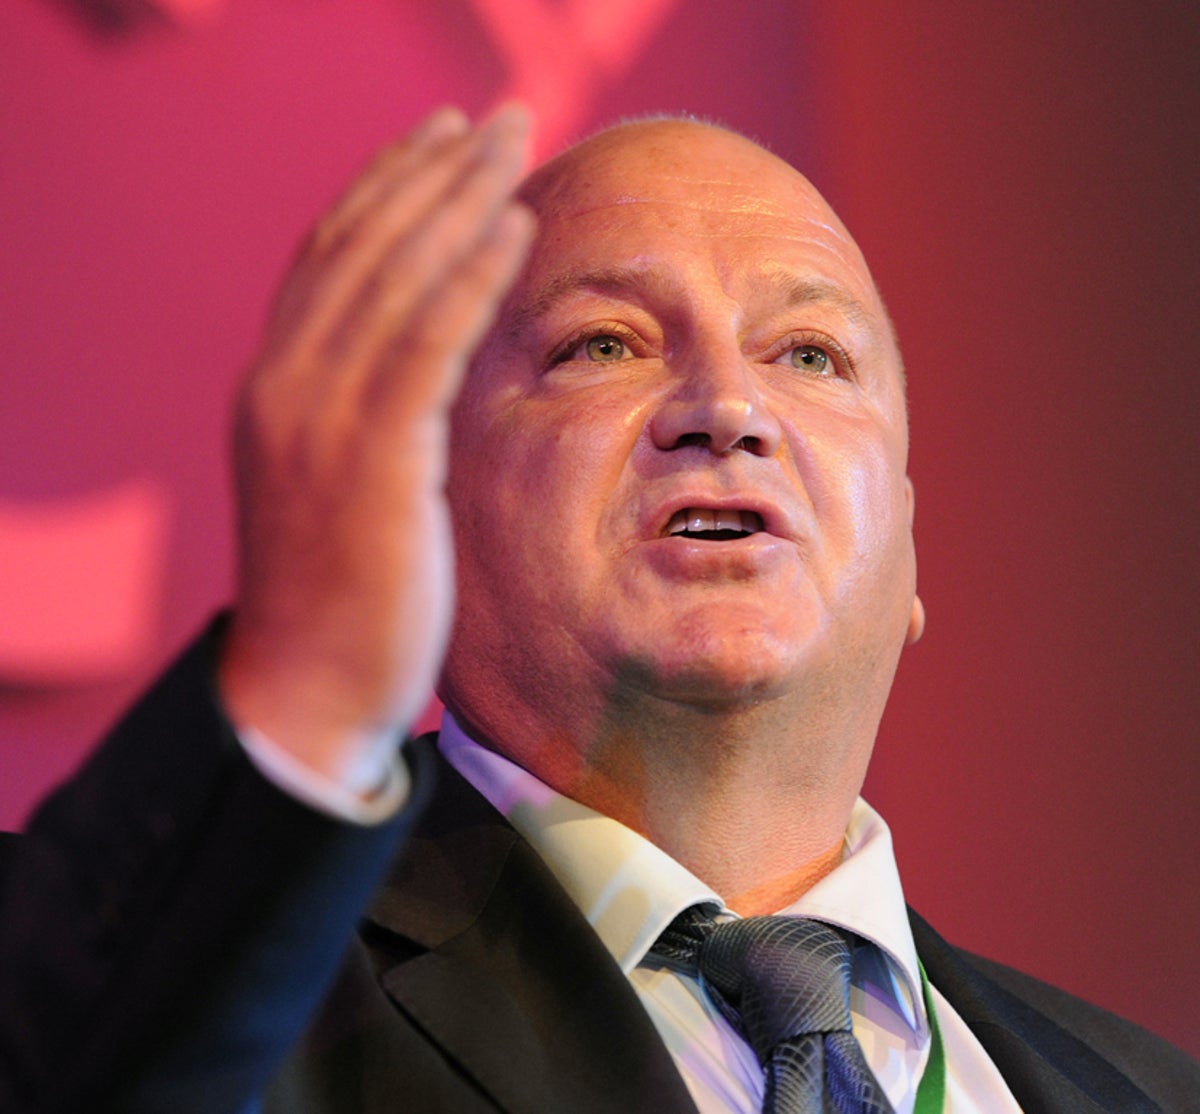 Candidates to replace Bob Crow as RMT union boss